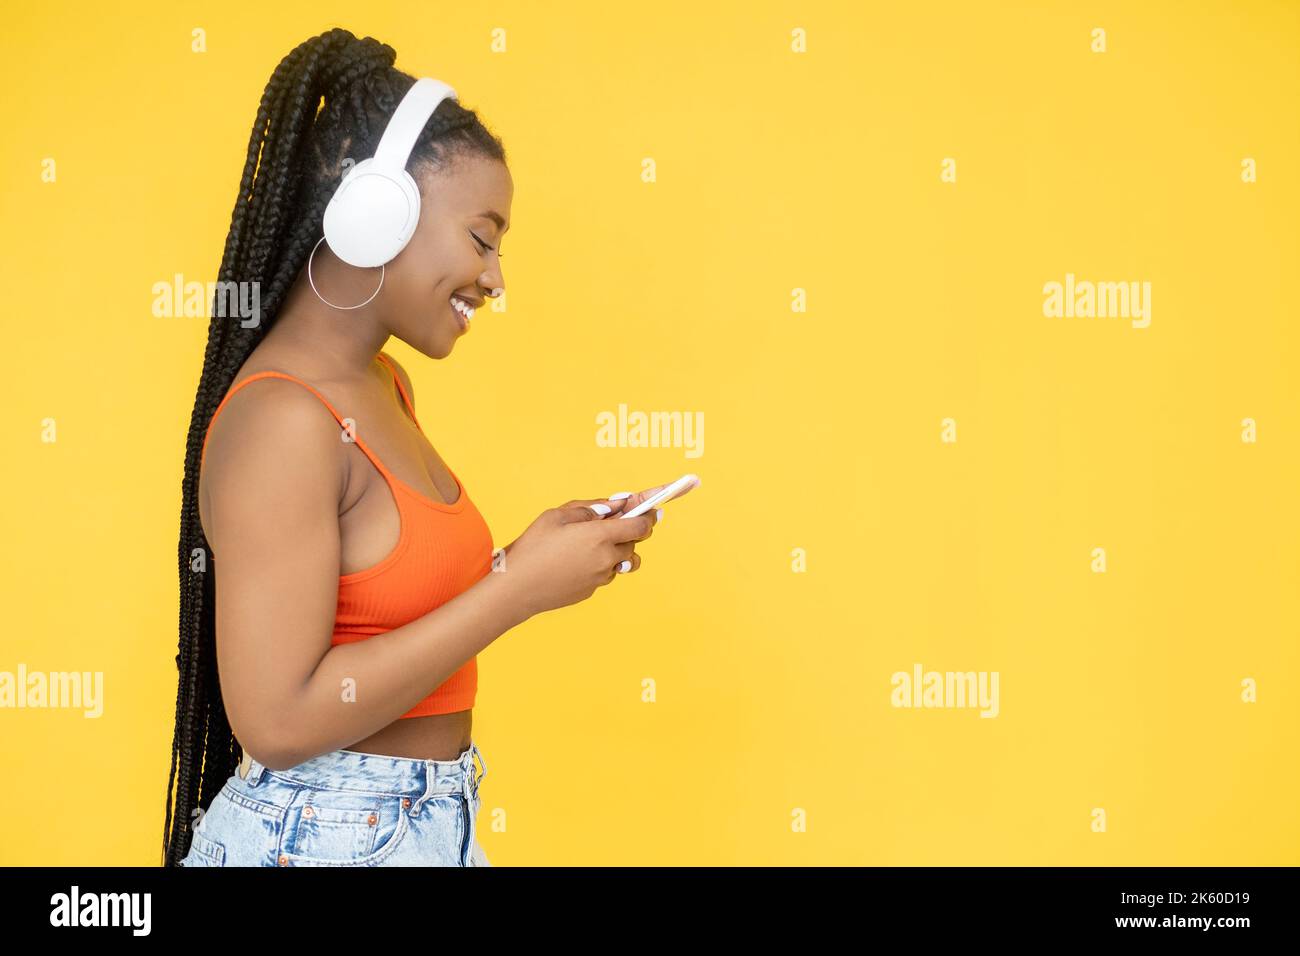 gadget lifestyle music media african woman phone Stock Photo